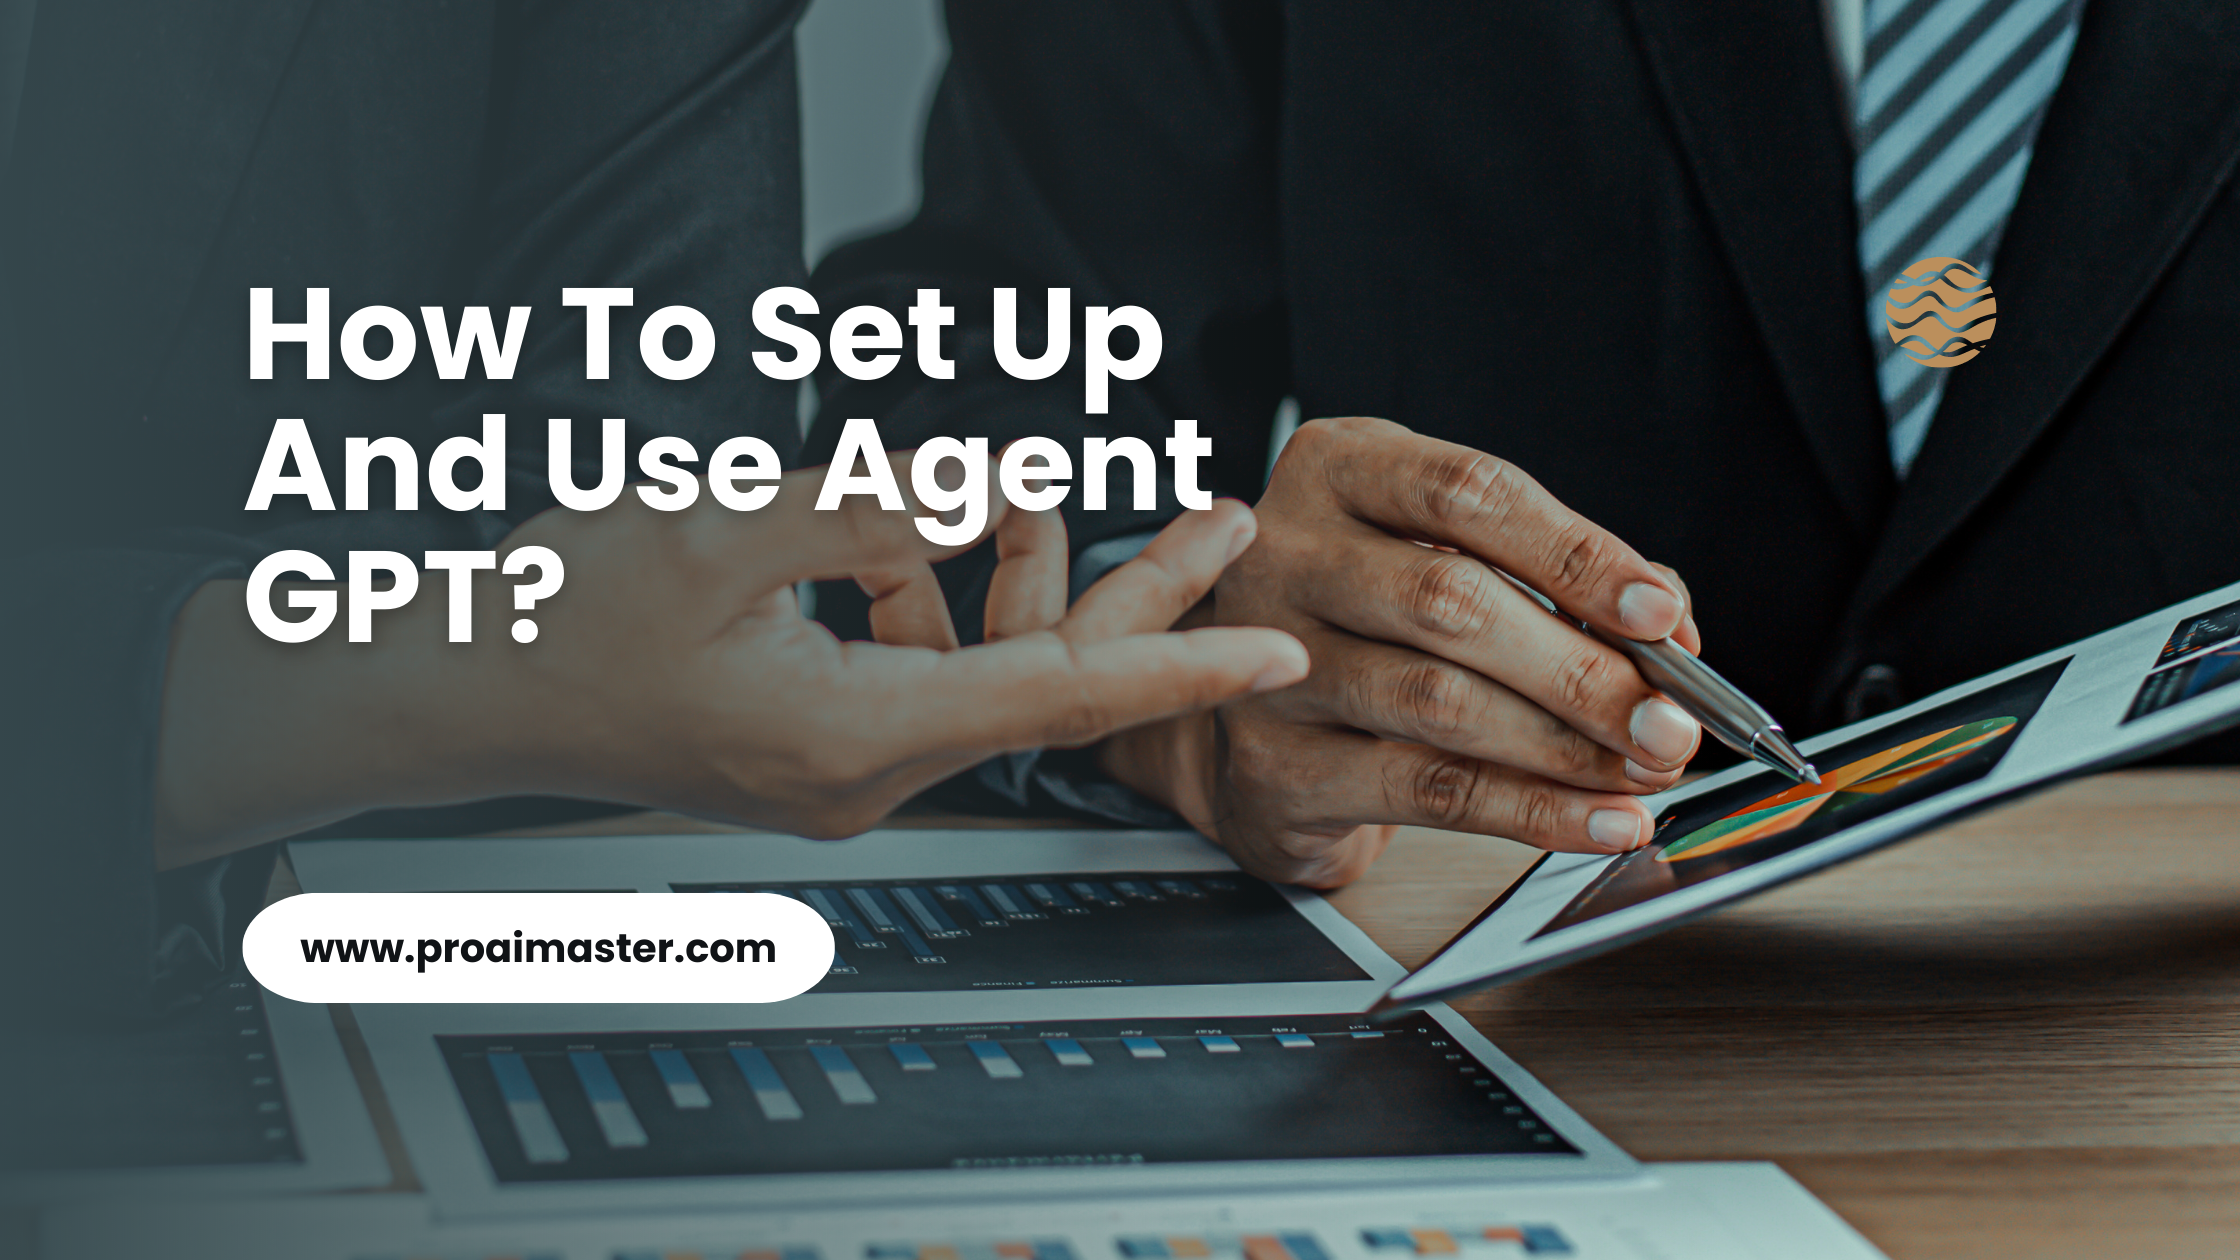 How To Set Up And Use Agent GPT In 2023?